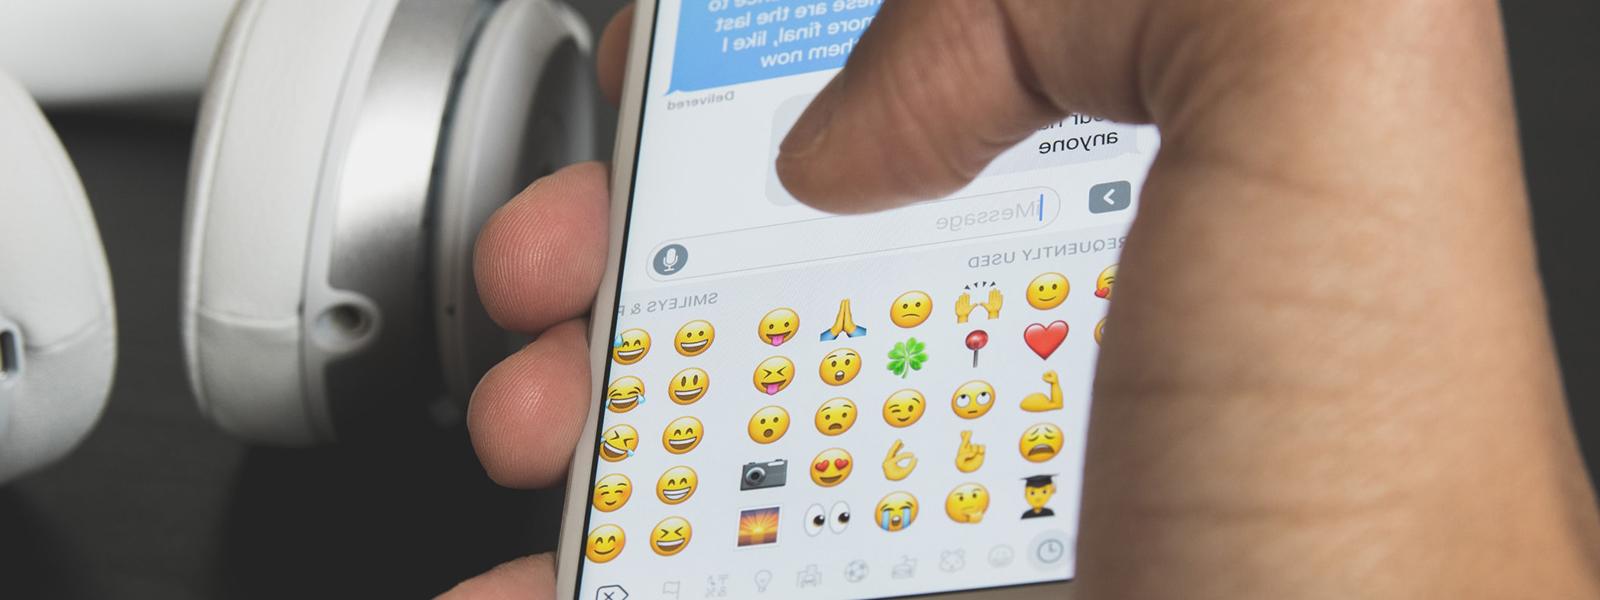 Close-up photo of a hand holding an iPhone while typing on an emoji keyboard.